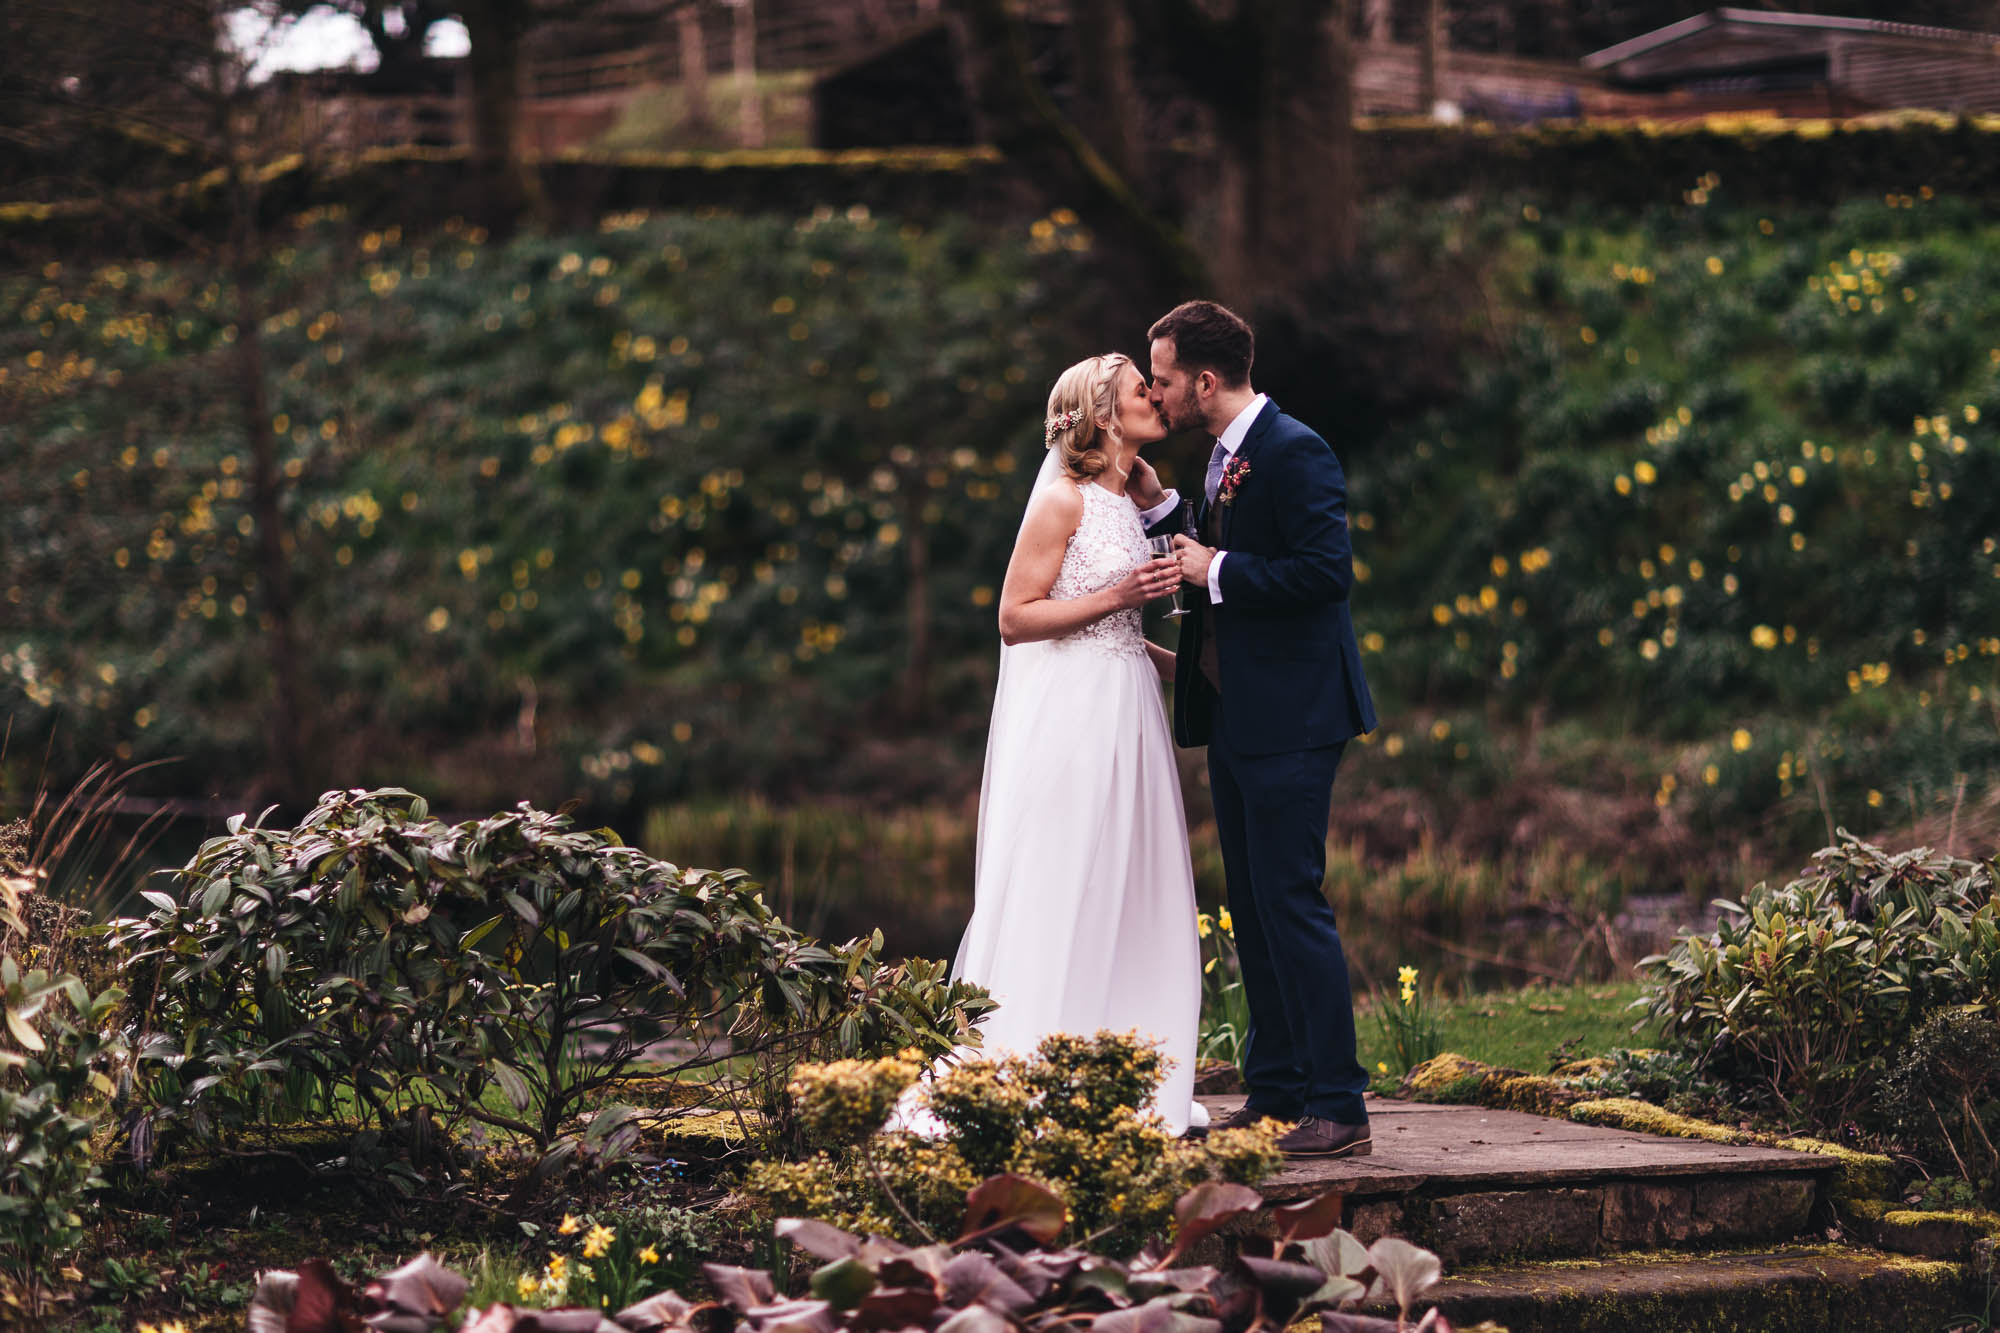 Newlyweds share a kiss and glass of bubbly surrounded by foliage